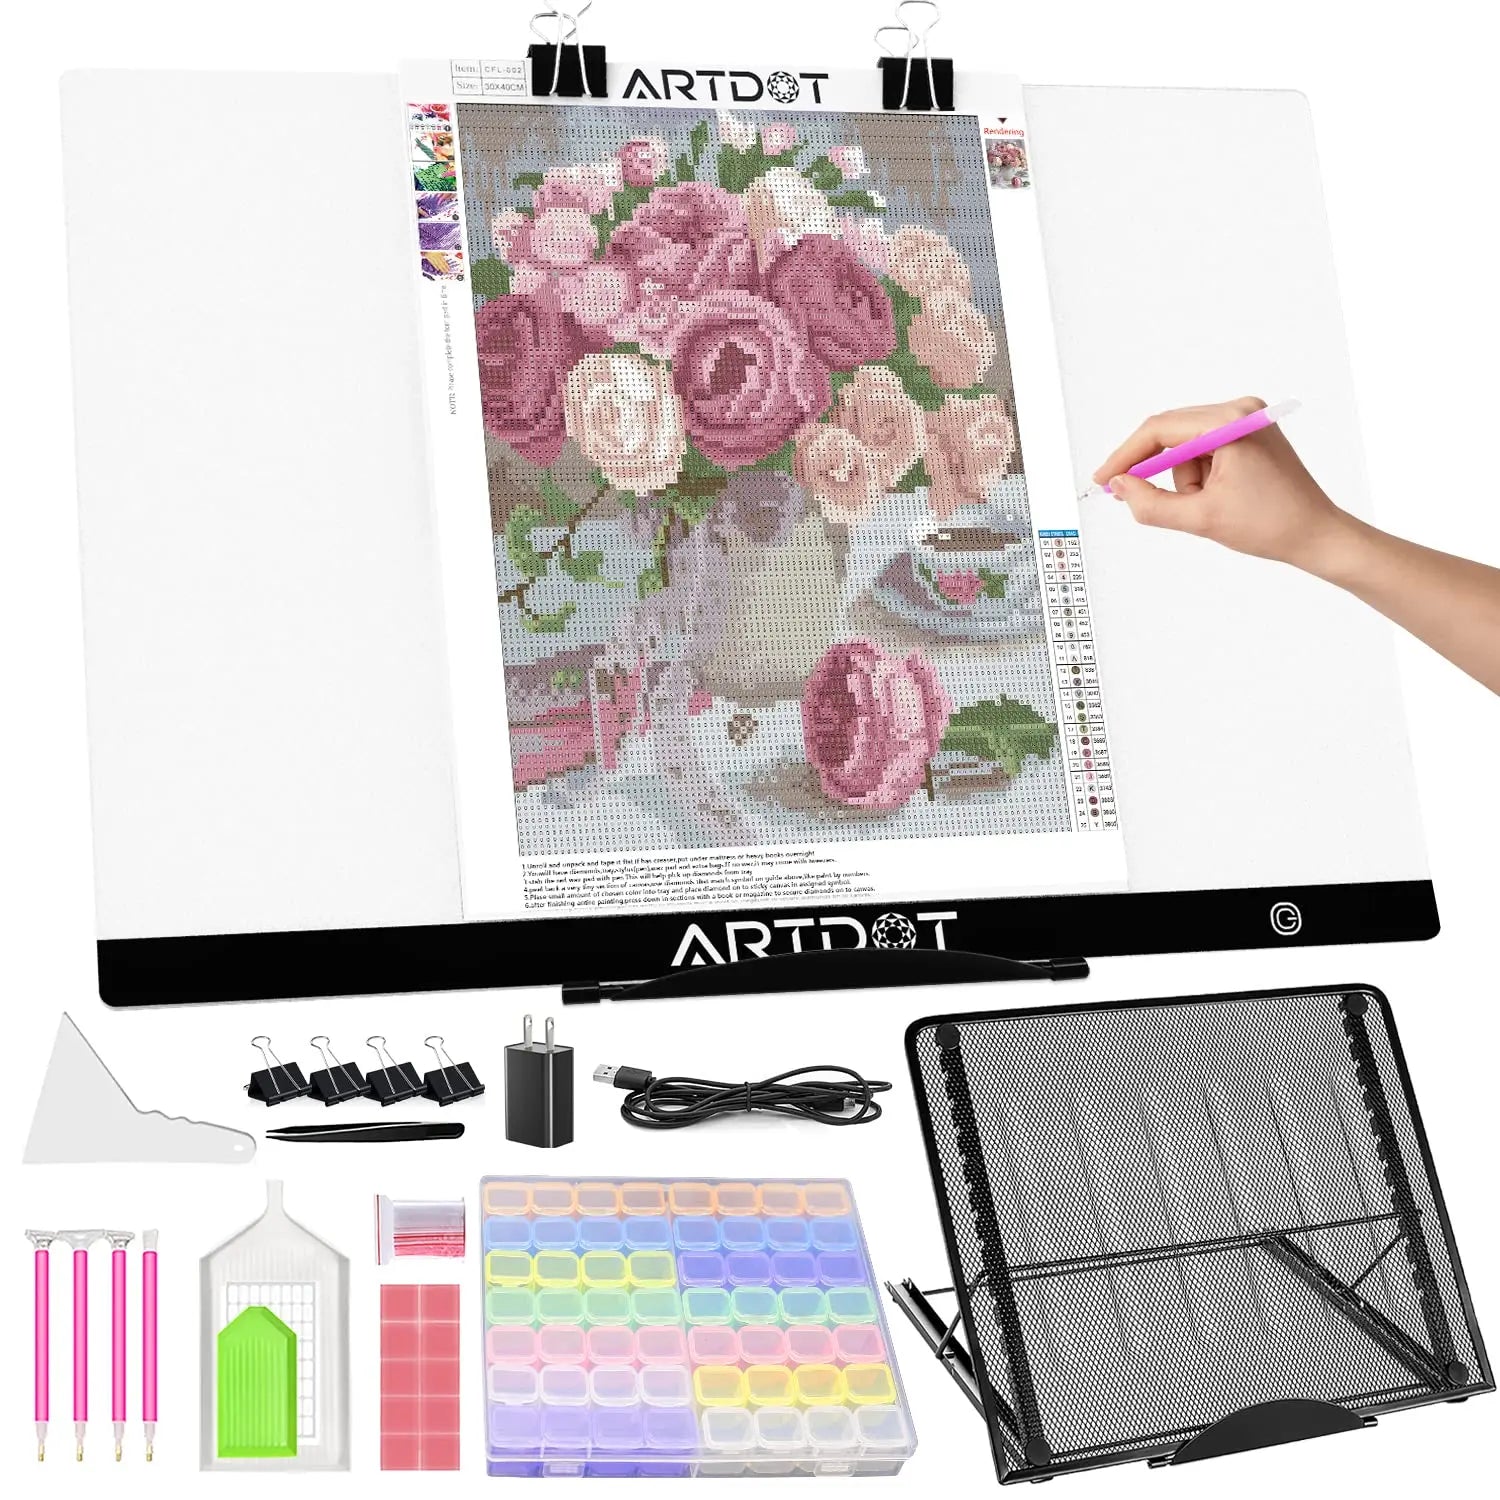  A4 LED Light Pad for Diamond Painting, USB Powered 3 Levels  Adjustable Brightness Light Board Kits with Detachable Stand and Clips (A4  LED Light Pad Kits E)